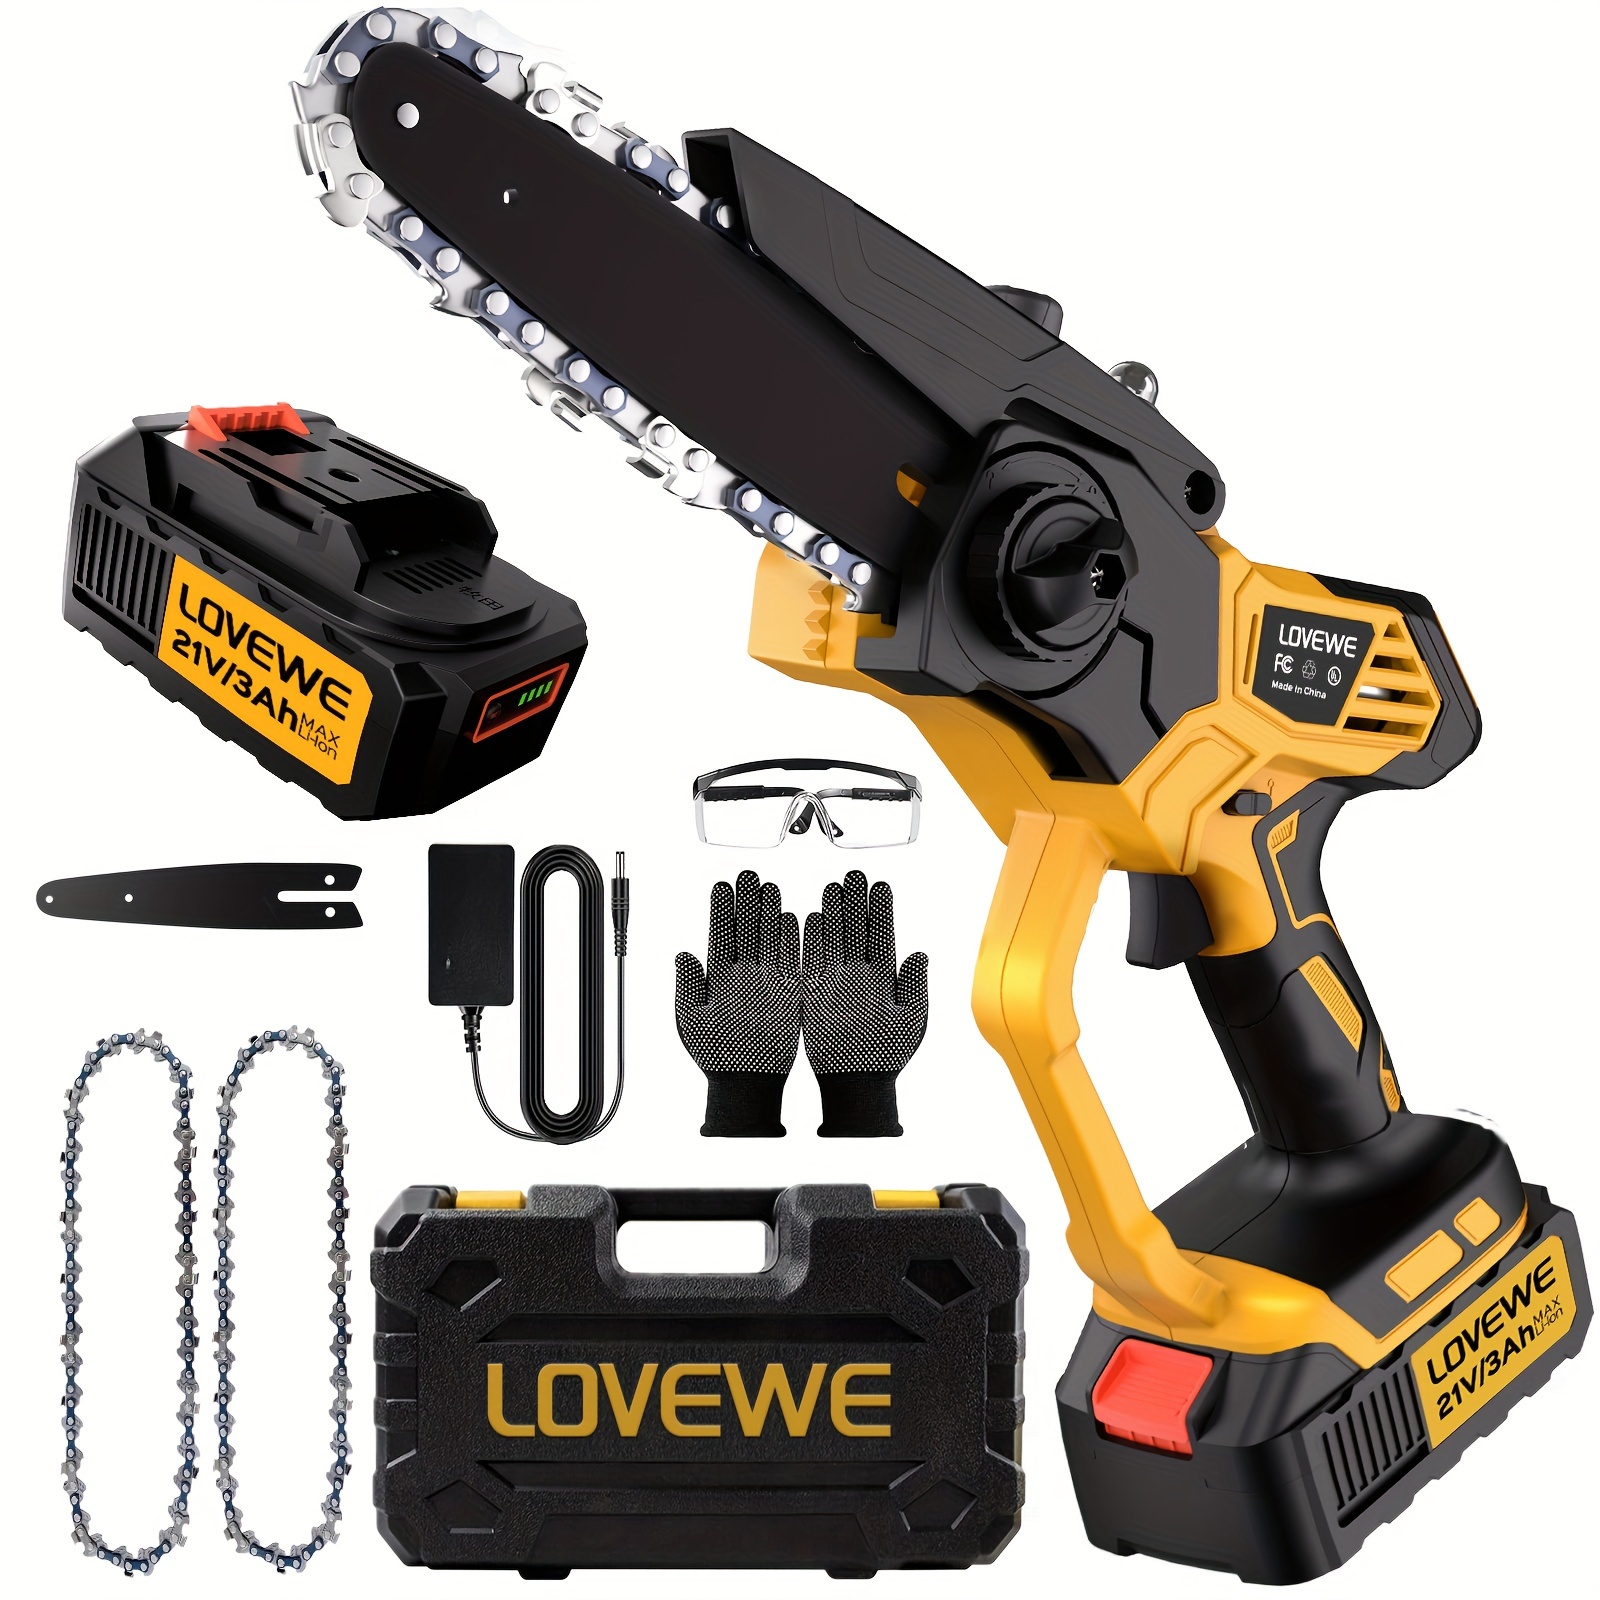 

Mini Chainsaw Cordless, 6 Inch Handheld Electric Chain Saw With 3.0ah Battery, 23ft/s Speed - Automatic Chain Tensioning & Auto Oiler For Tree Branches, Courtyard, Household, And Garden (yellow)